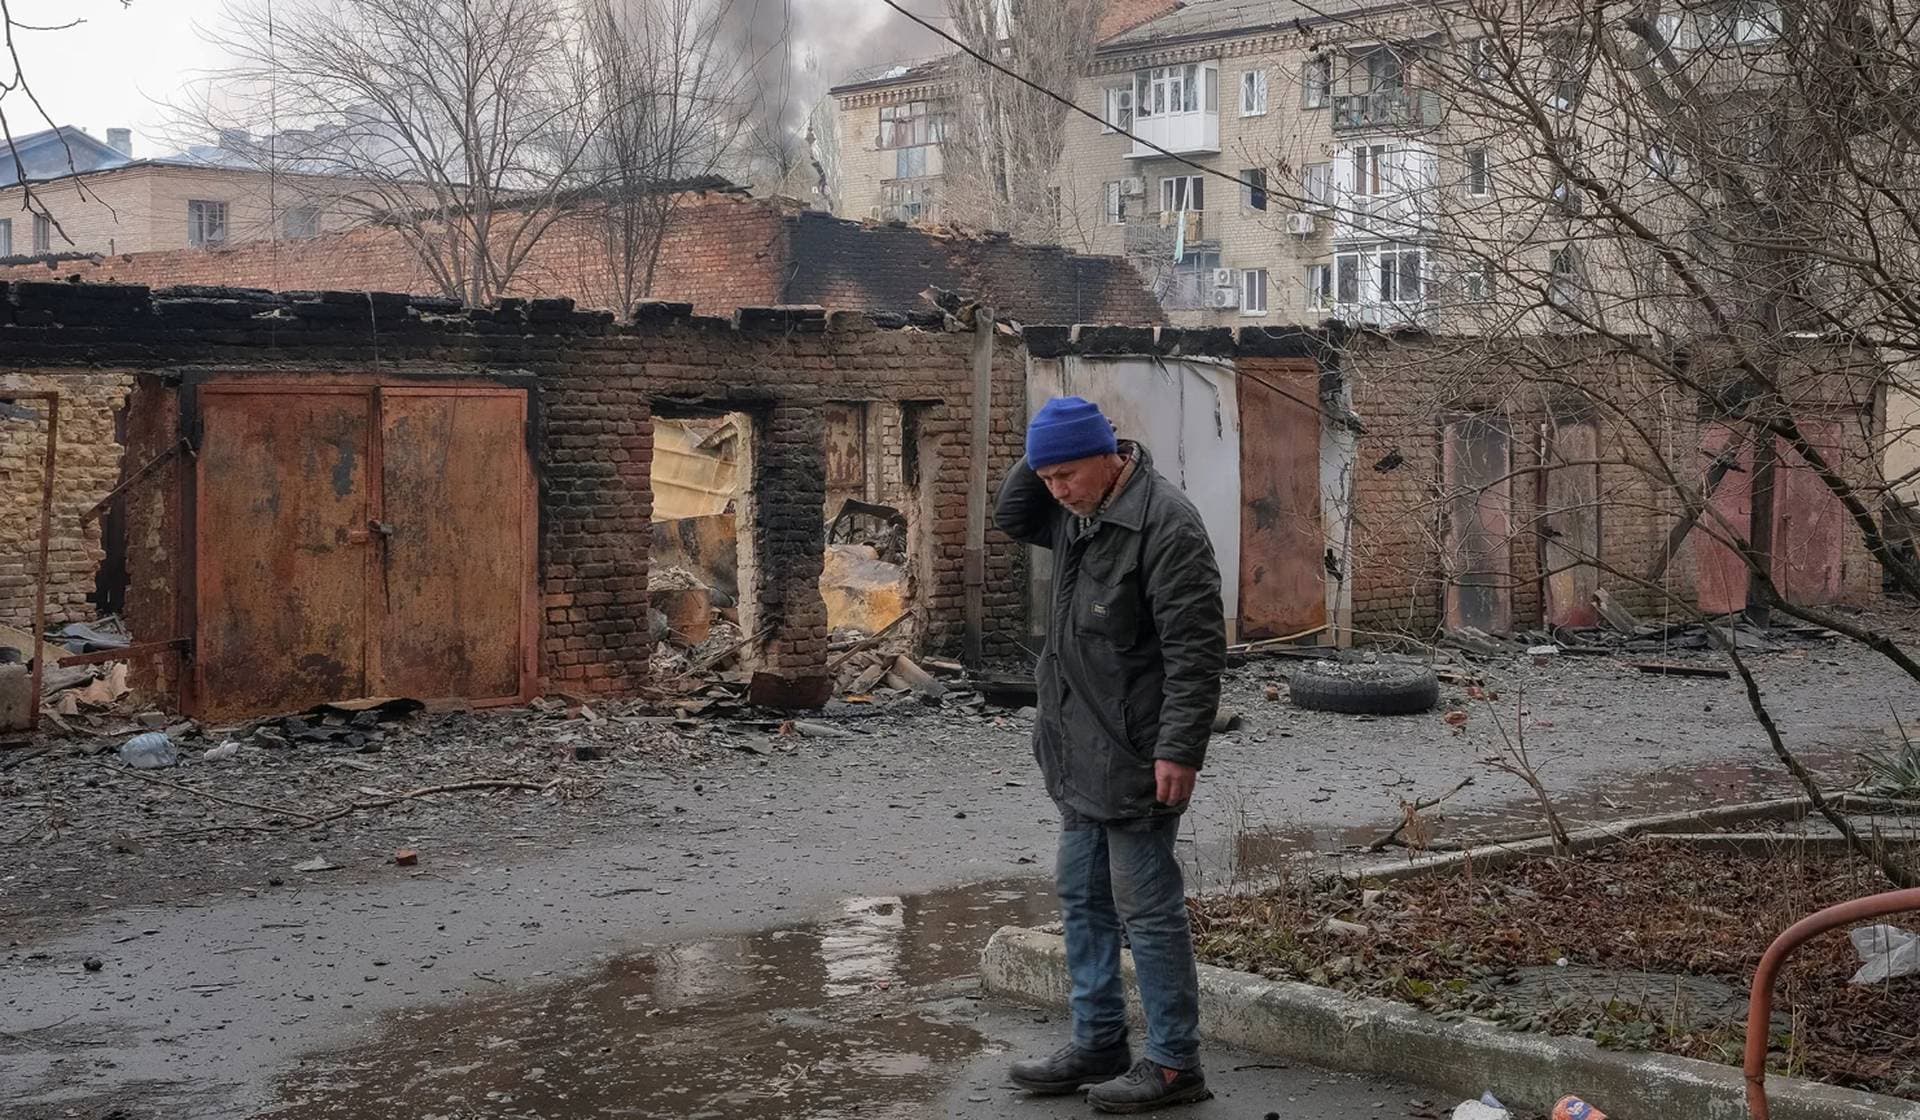 A local resident stands near buildings damaged by a Russian military strike in the frontline city of Bakhmut